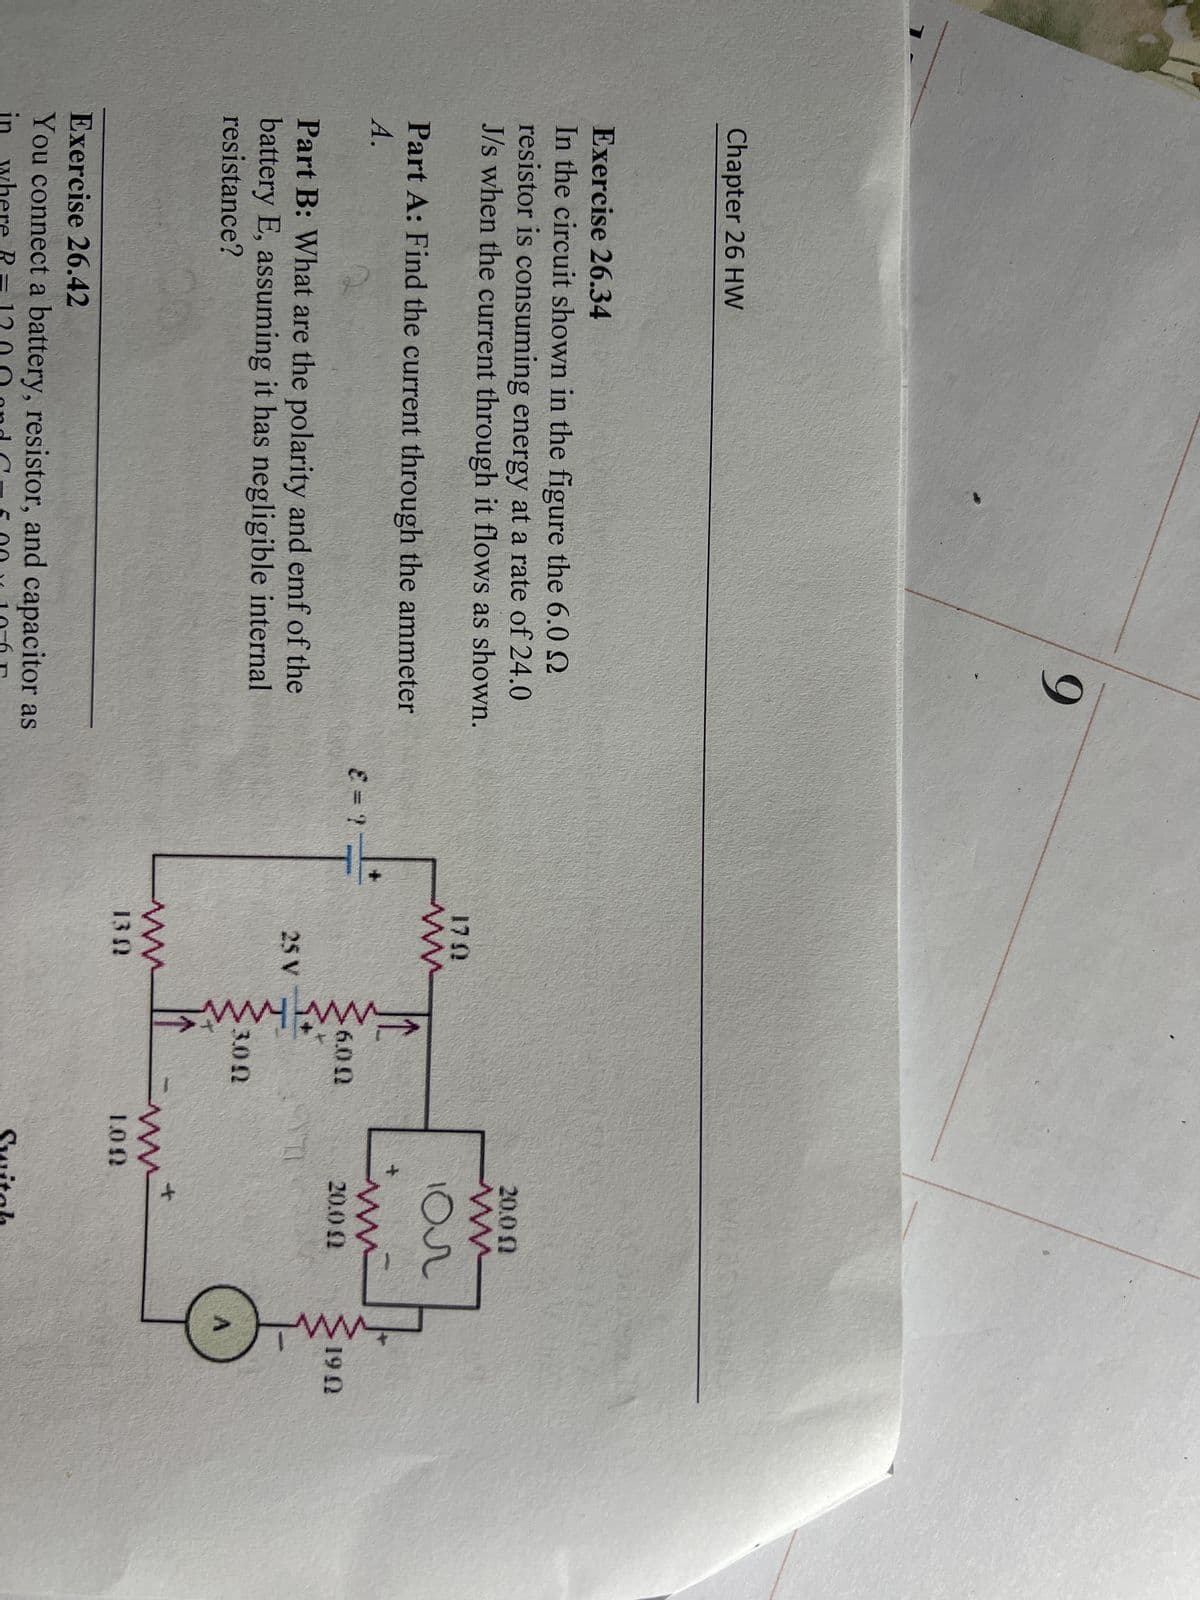 Chapter 26 HW
9
Exercise 26.34
In the circuit shown in the figure the 6.0
resistor is consuming energy at a rate of 24.0
J/s when the current through it flows as shown.
Part A: Find the current through the ammeter
A.
Part B: What are the polarity and emf of the
battery E, assuming it has negligible internal.
resistance?
Exercise 26.42
You connect a battery, resistor, and capacitor as
in where R=1200 and C
and C 5.00~ 10-6
SALT
1702
ww
25 V
www
6.00
3.00
ks
20.0 @
tum
20.0 (2
170
ww
m+
100
Switch
1902